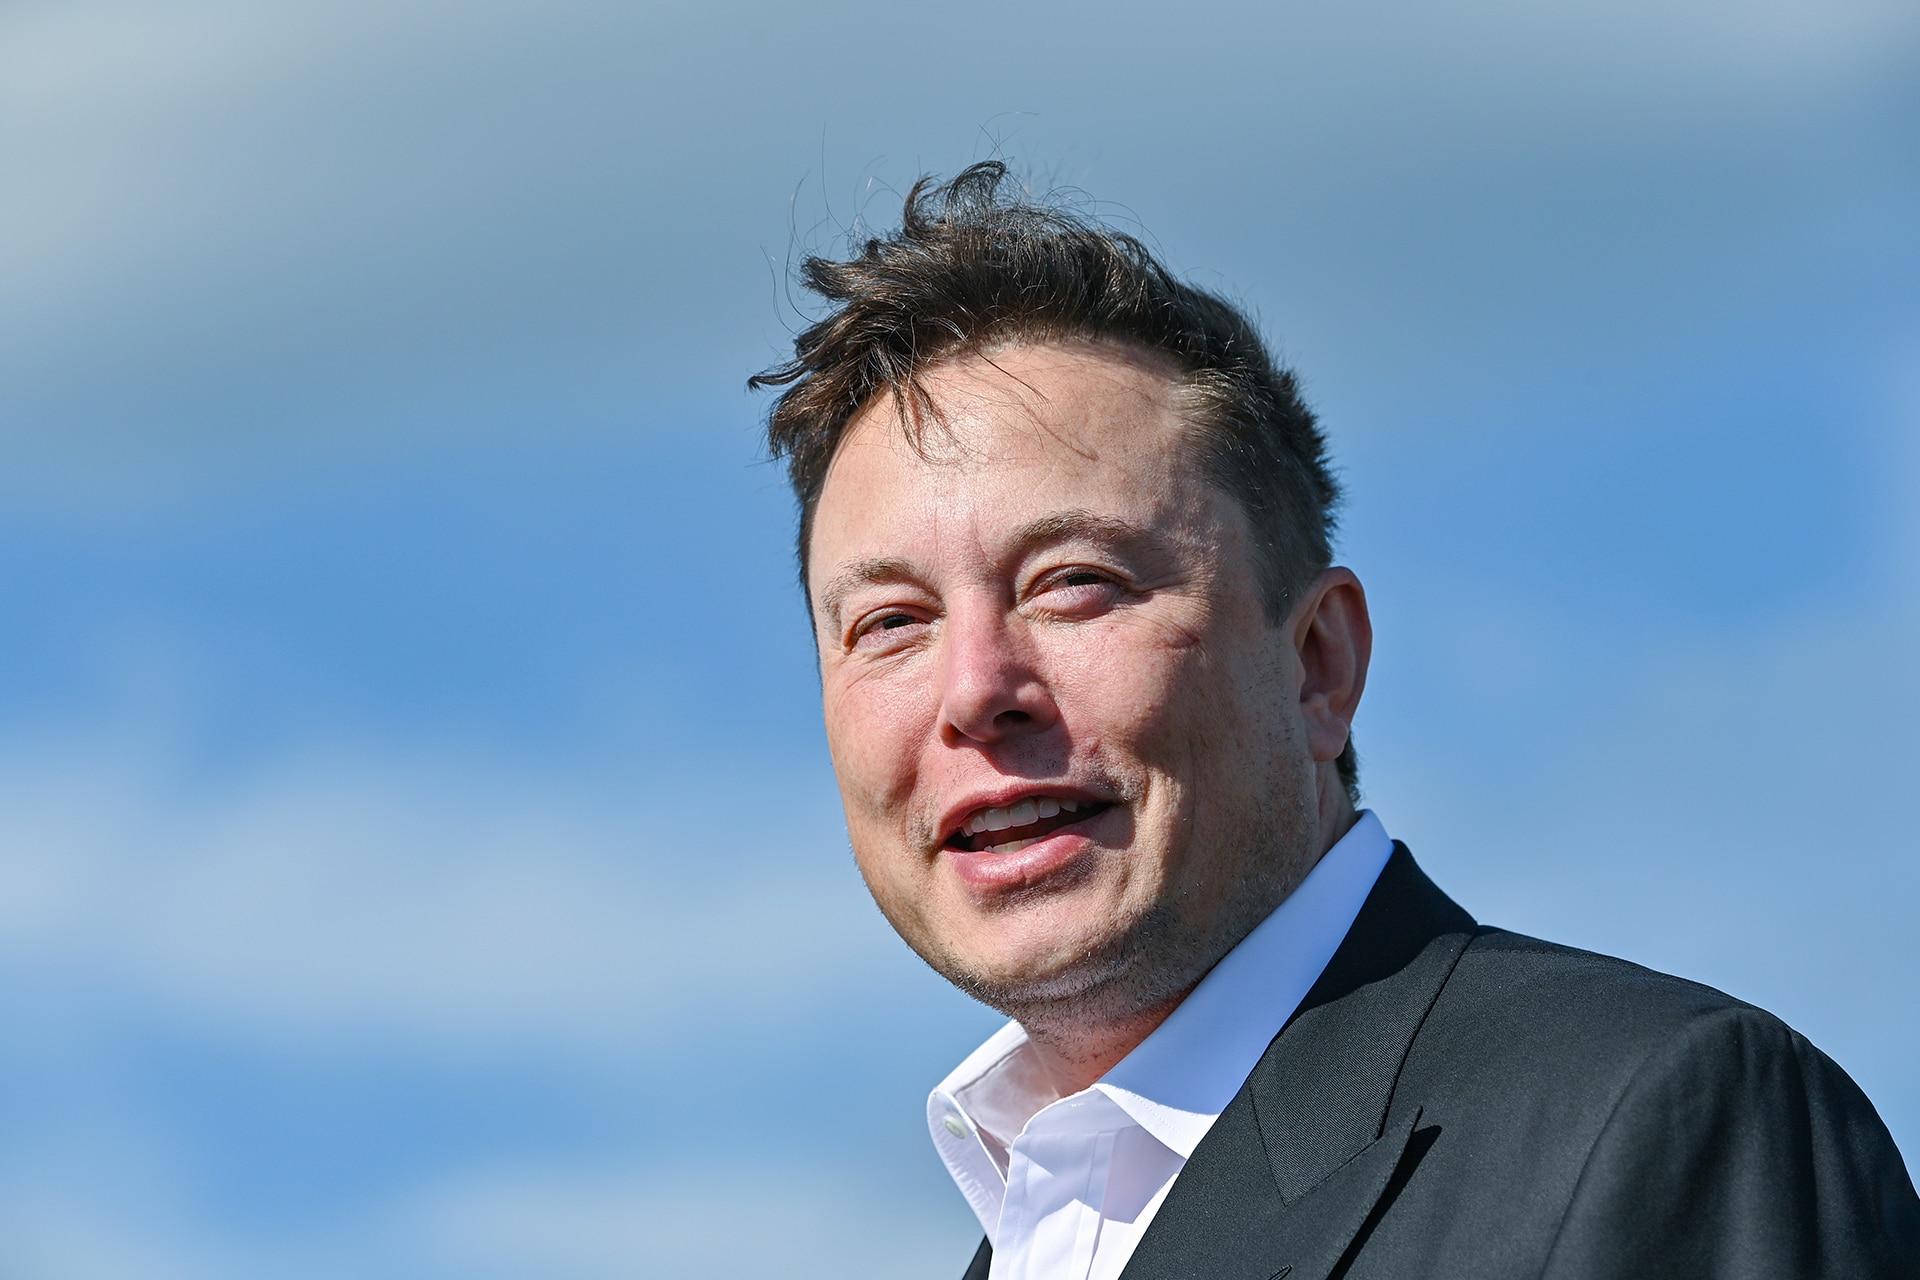 Elon Musk Just Became The World's Second-Richest Person - GQ